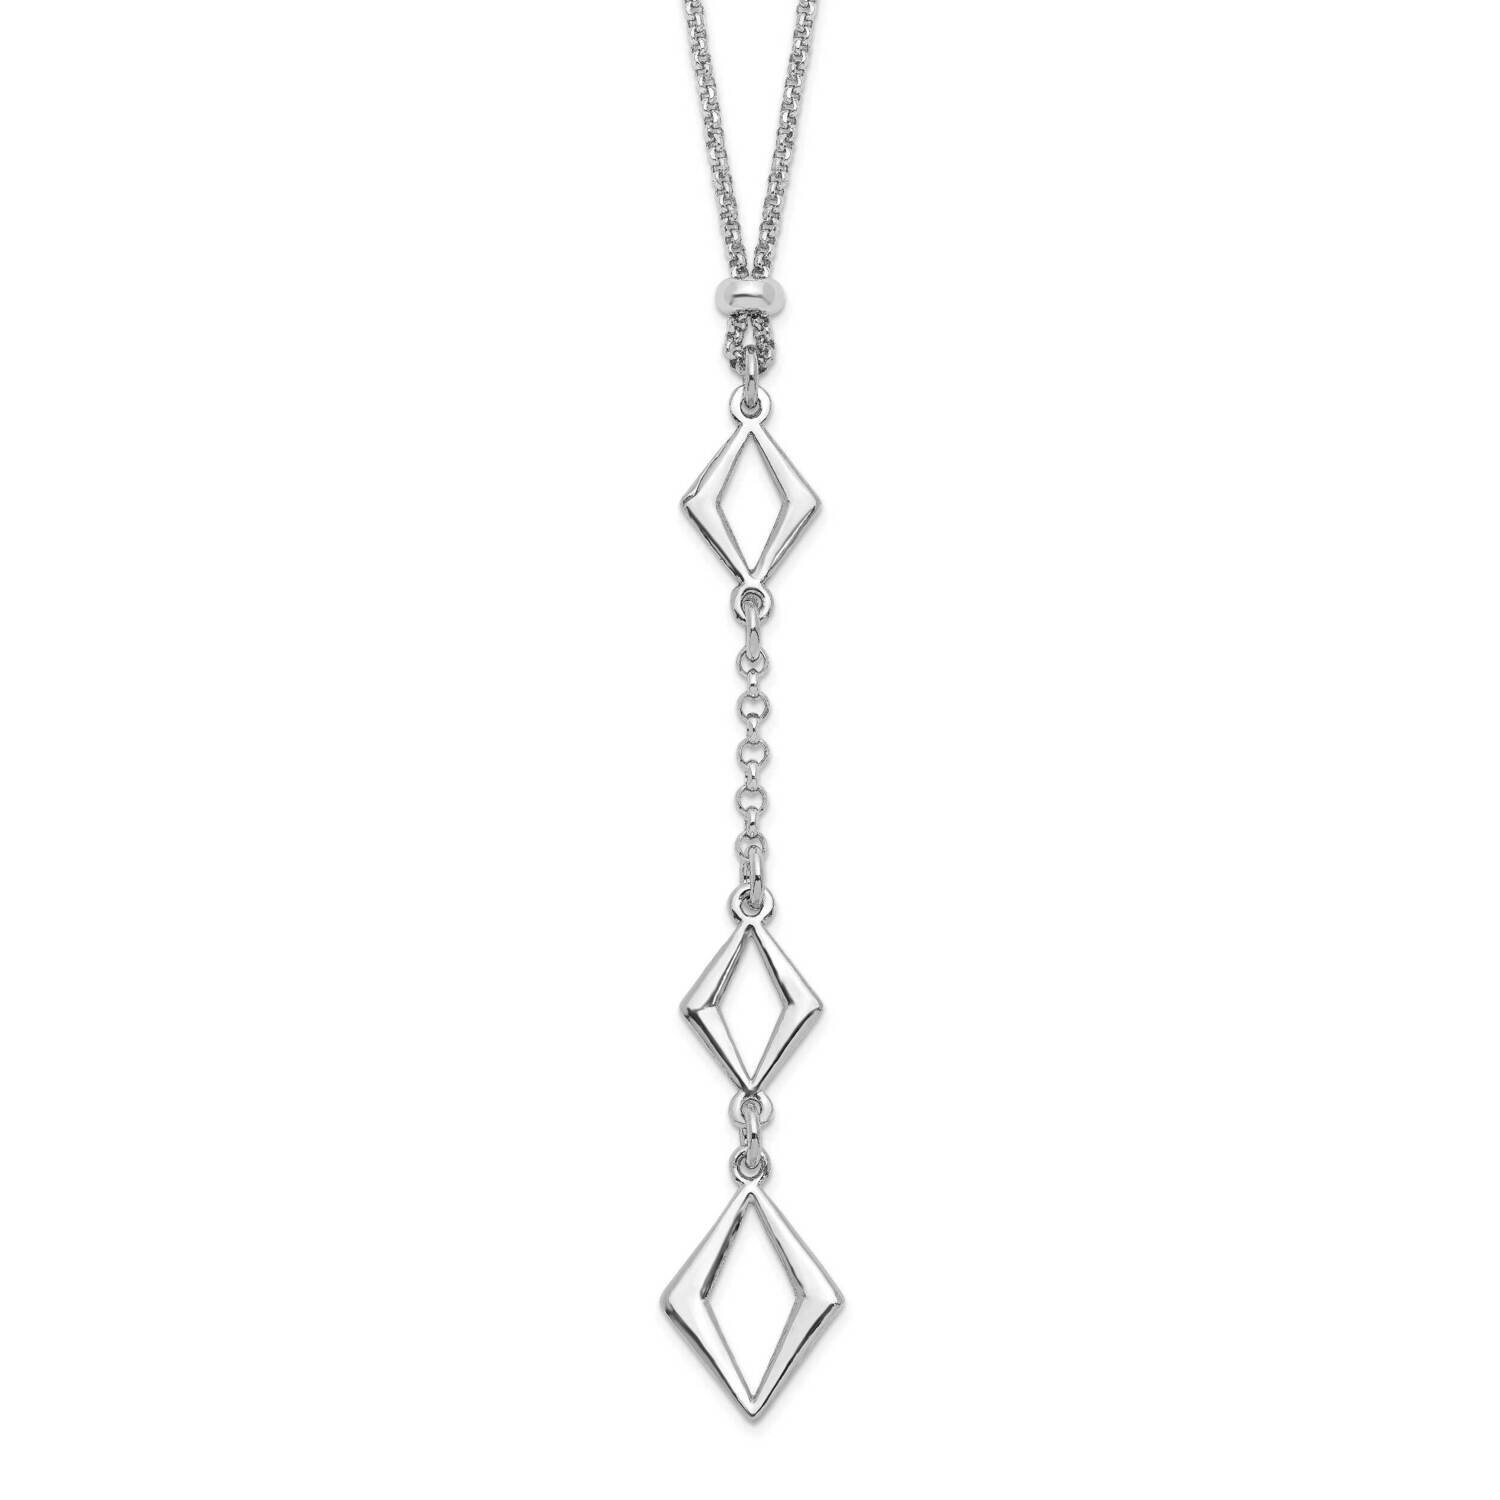 Adjustable with 1.5 Inch Ext. Necklace Sterling Silver Rhodium-plated HB-QLF1174-15.5